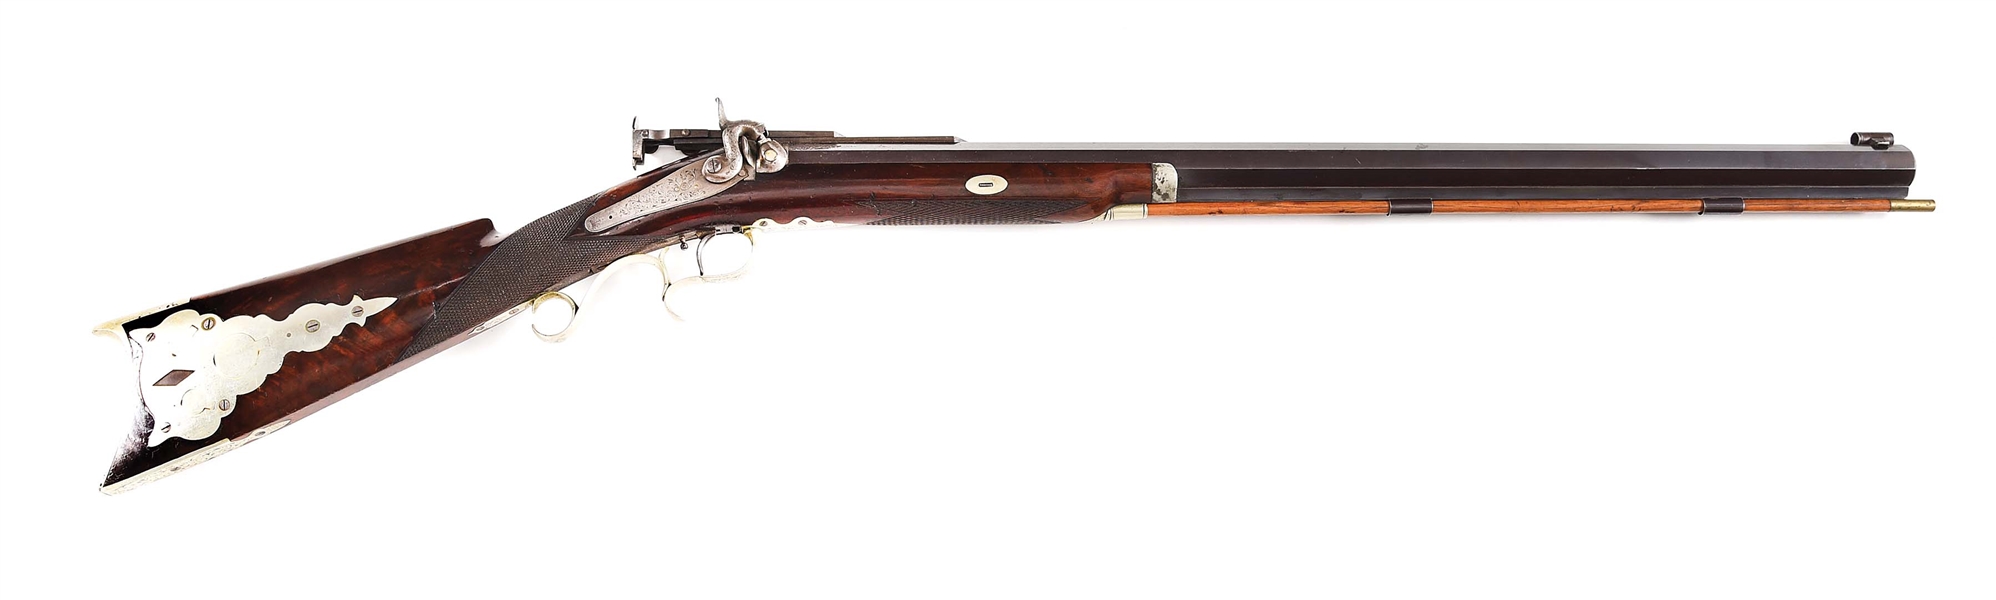 (A) S.C. MILLER HALF STOCK PERCUSSION RIFLE WITH FALSE MUZZLE.